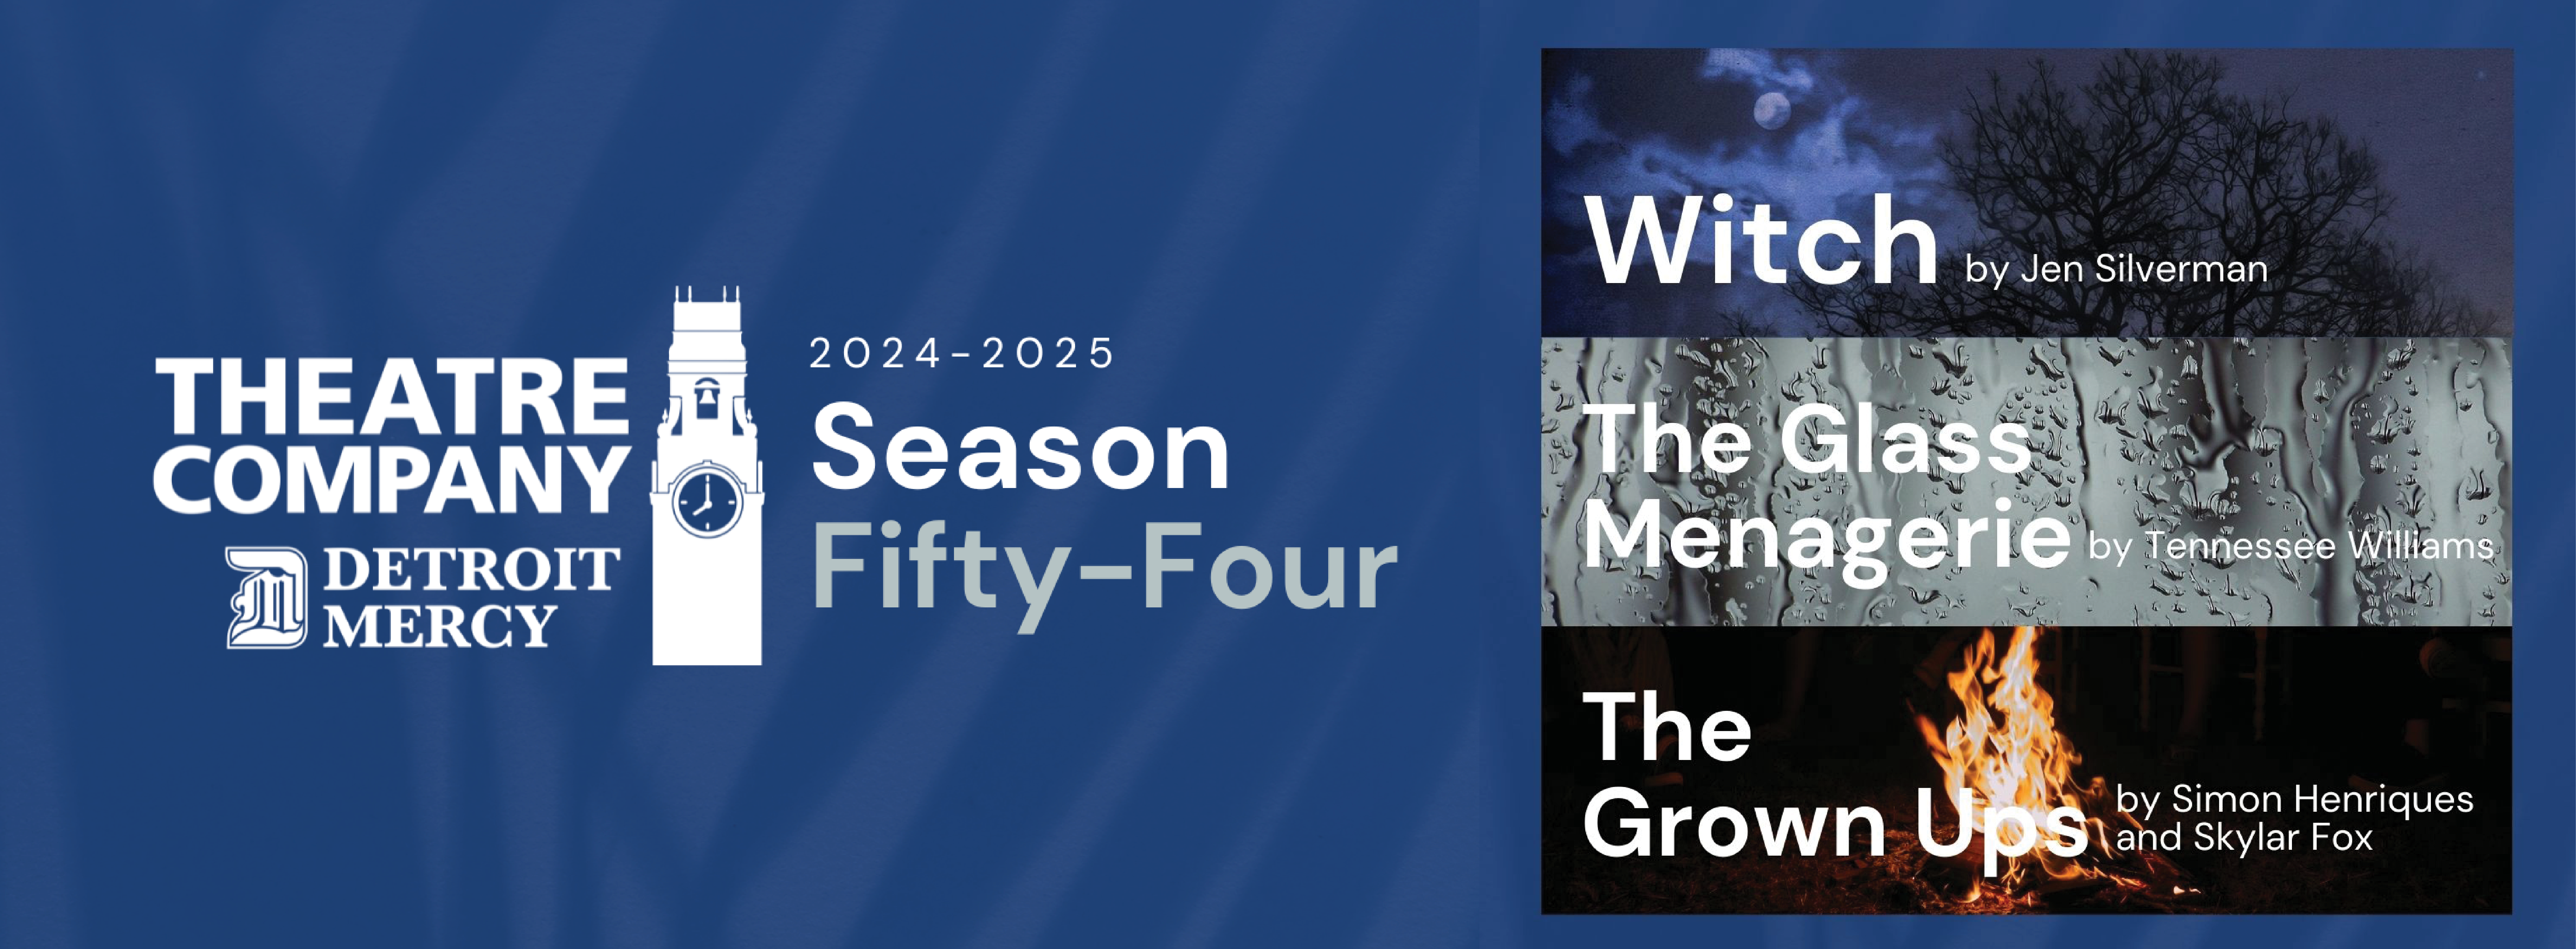 Theatre Company Logo. 2024-2025 Season 54. Witch by Jen Silverman. The Glass Menagerie by Tennessee Williams. The Grown Ups by Simon and Skylar